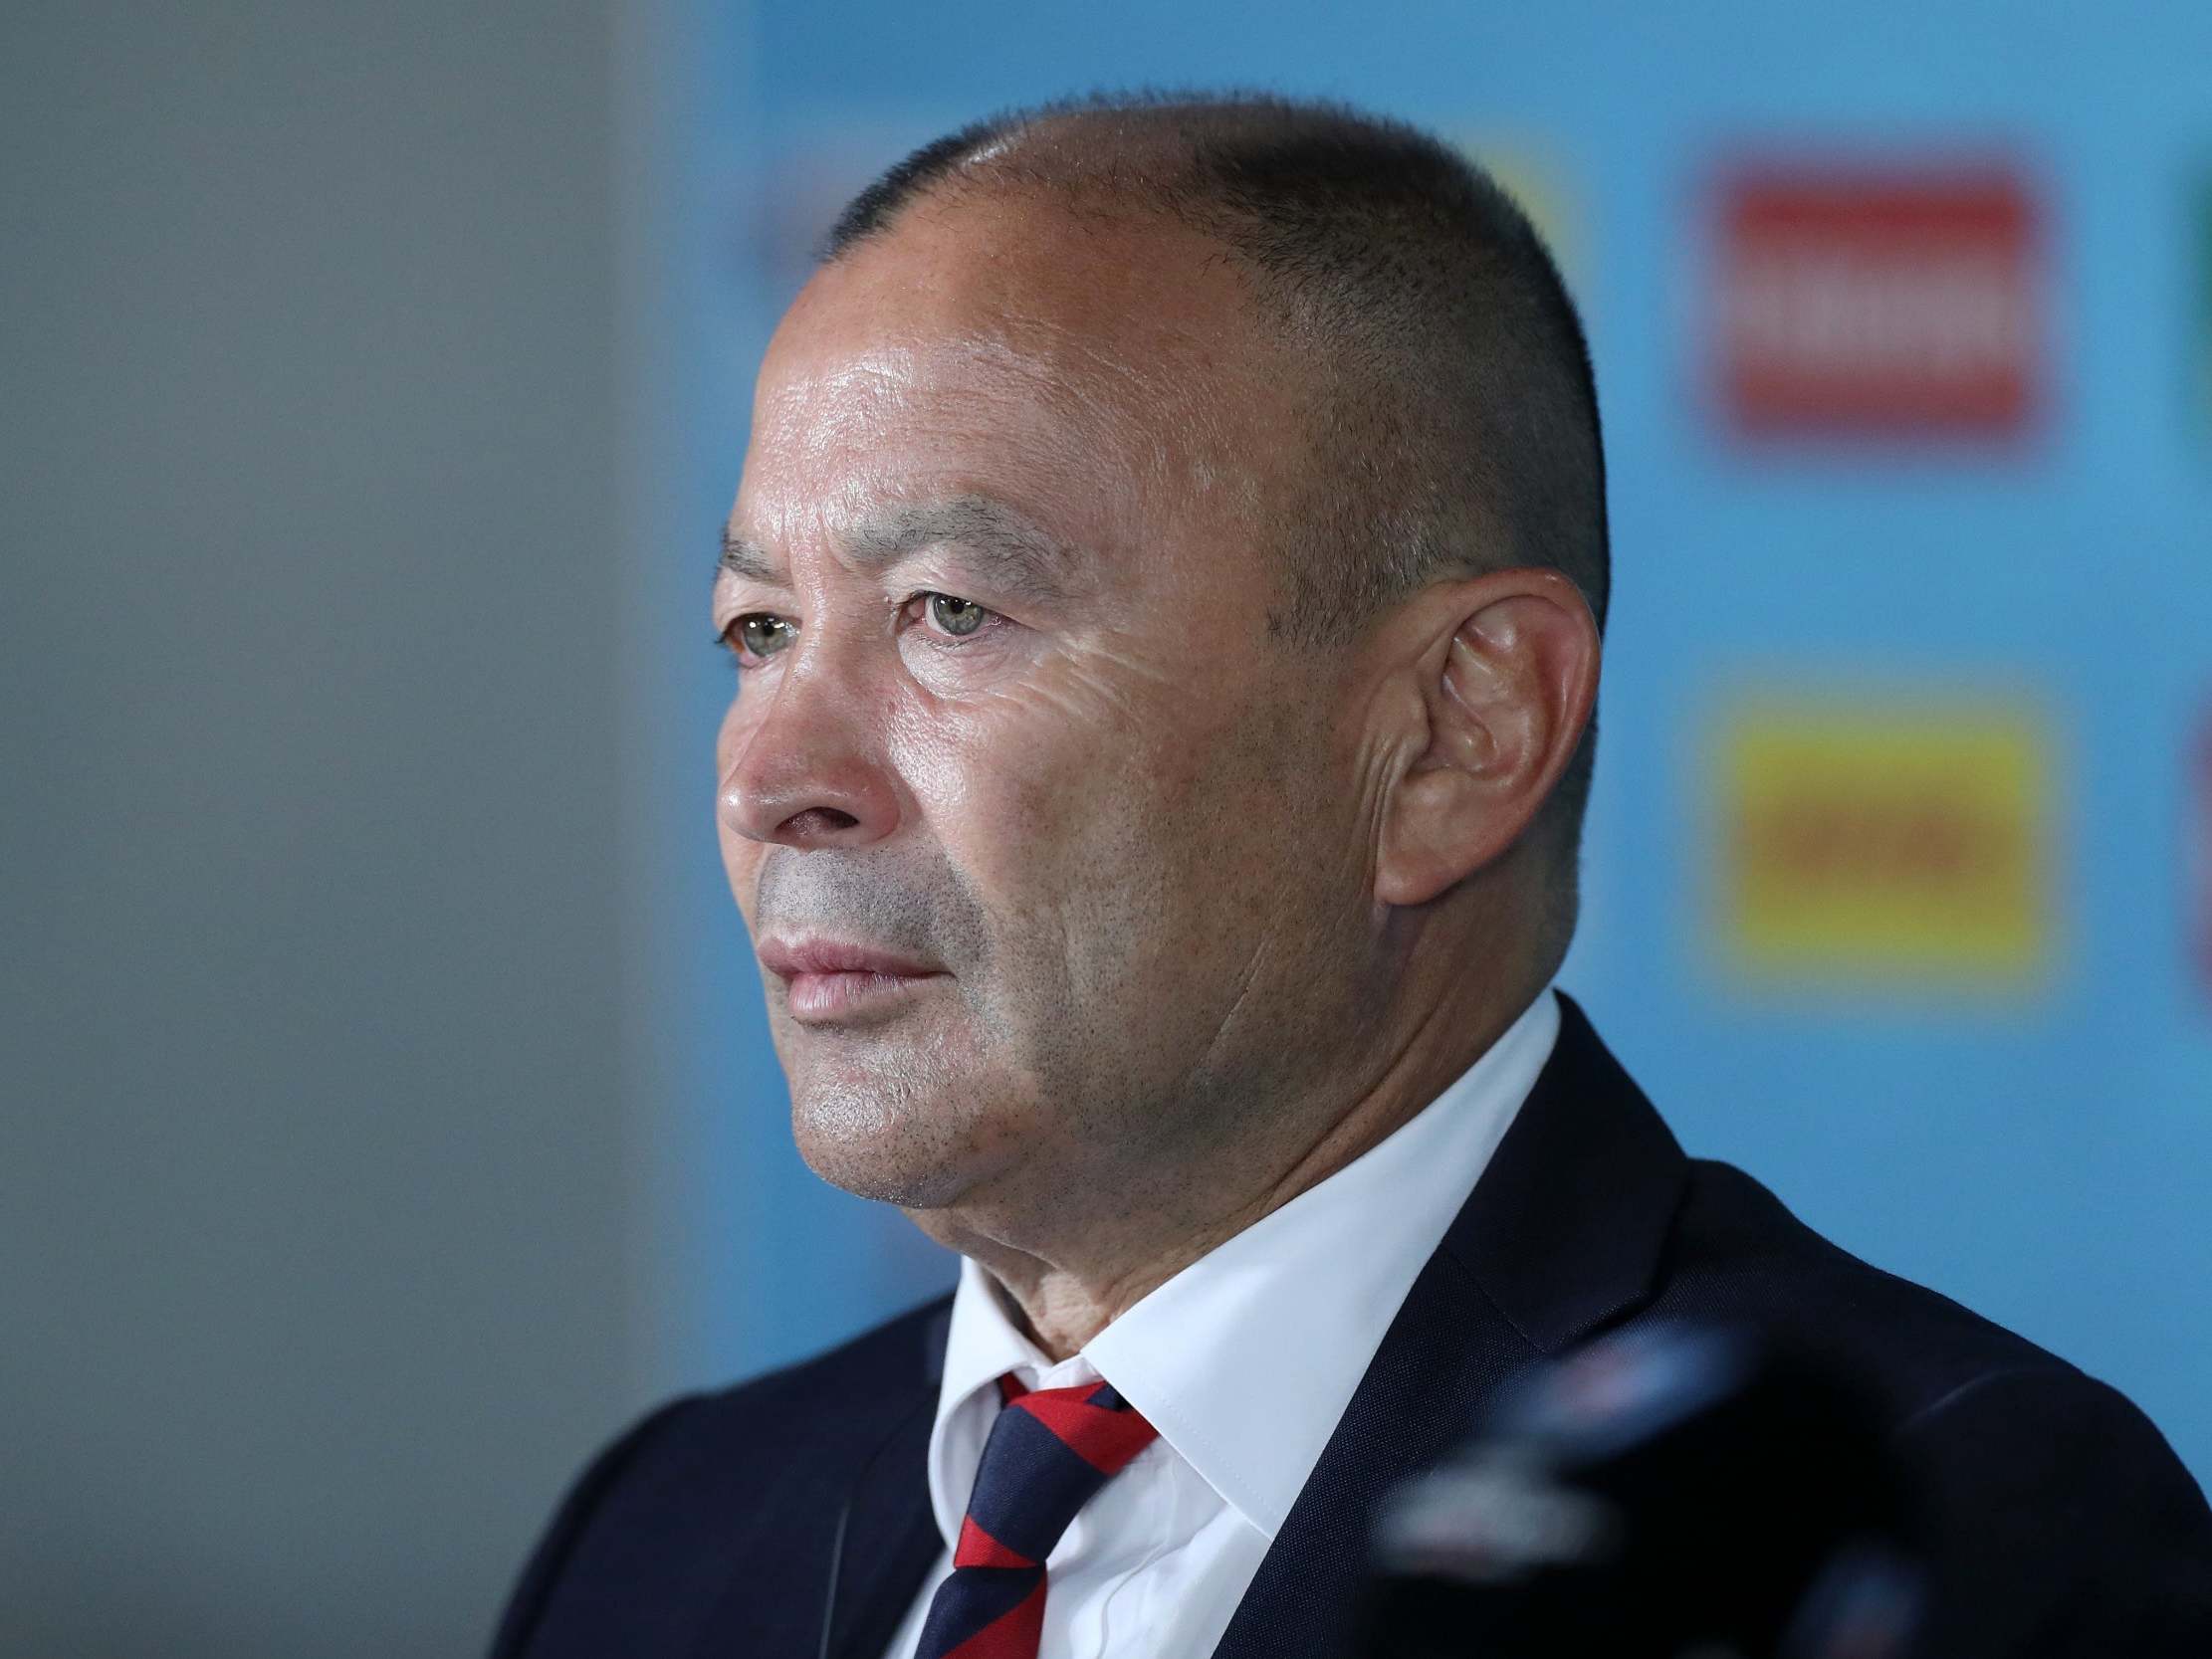 Eddie Jones wouldn’t however be drawn on whether he will extend his contract